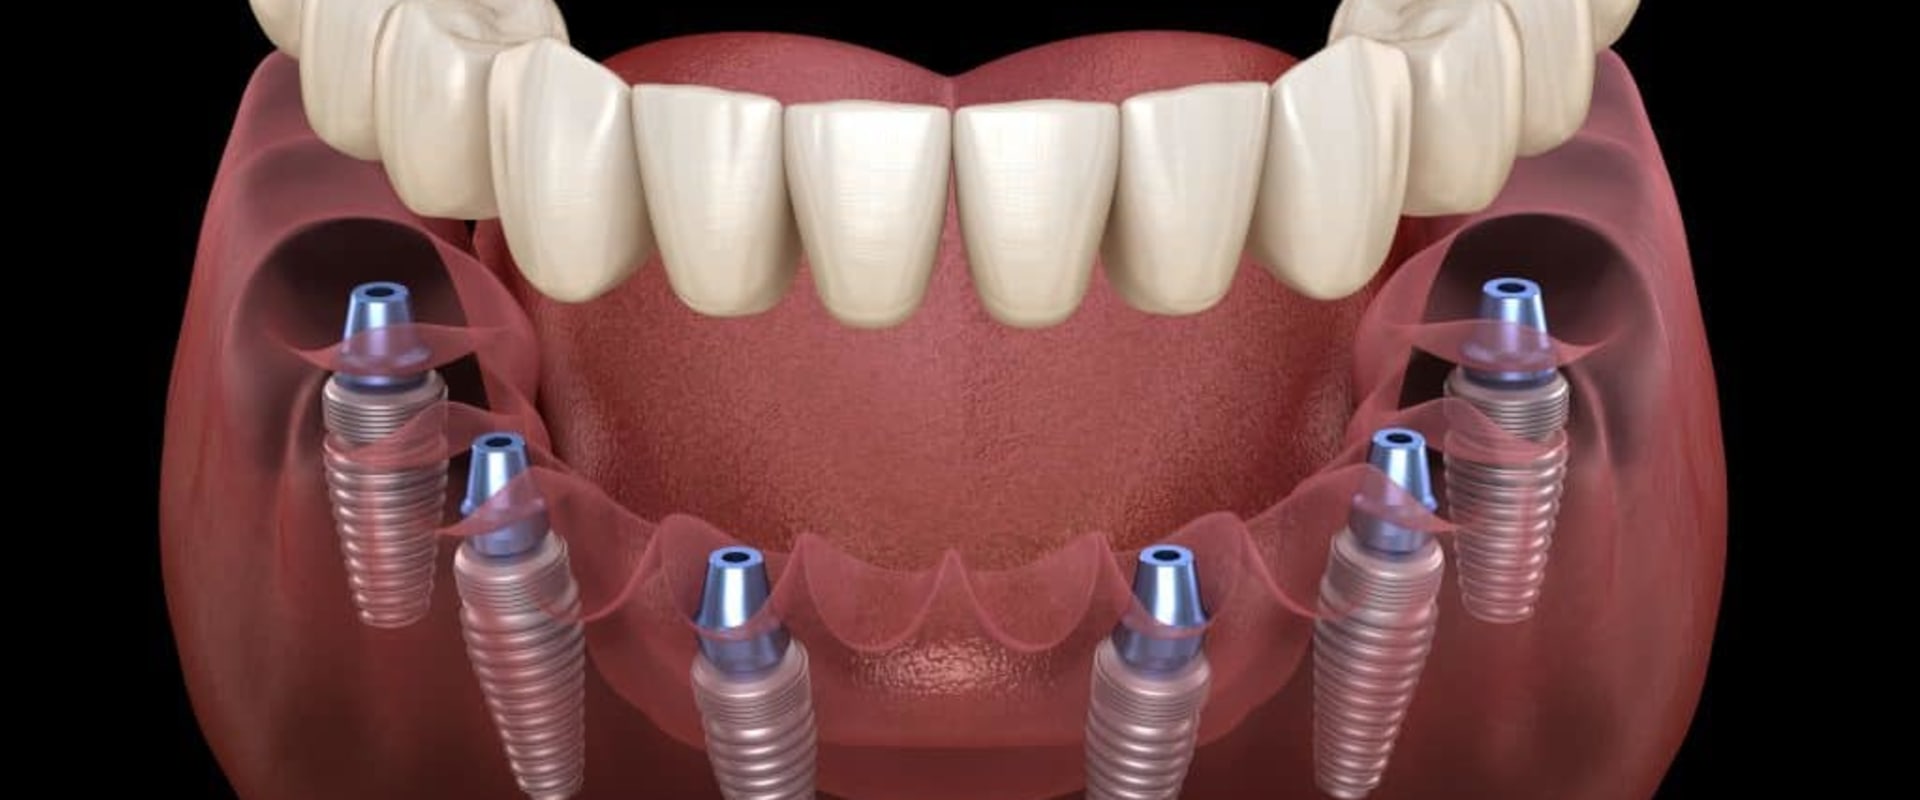 What is the Best Option for Dental Implants: All-on-4 or All-on-6?